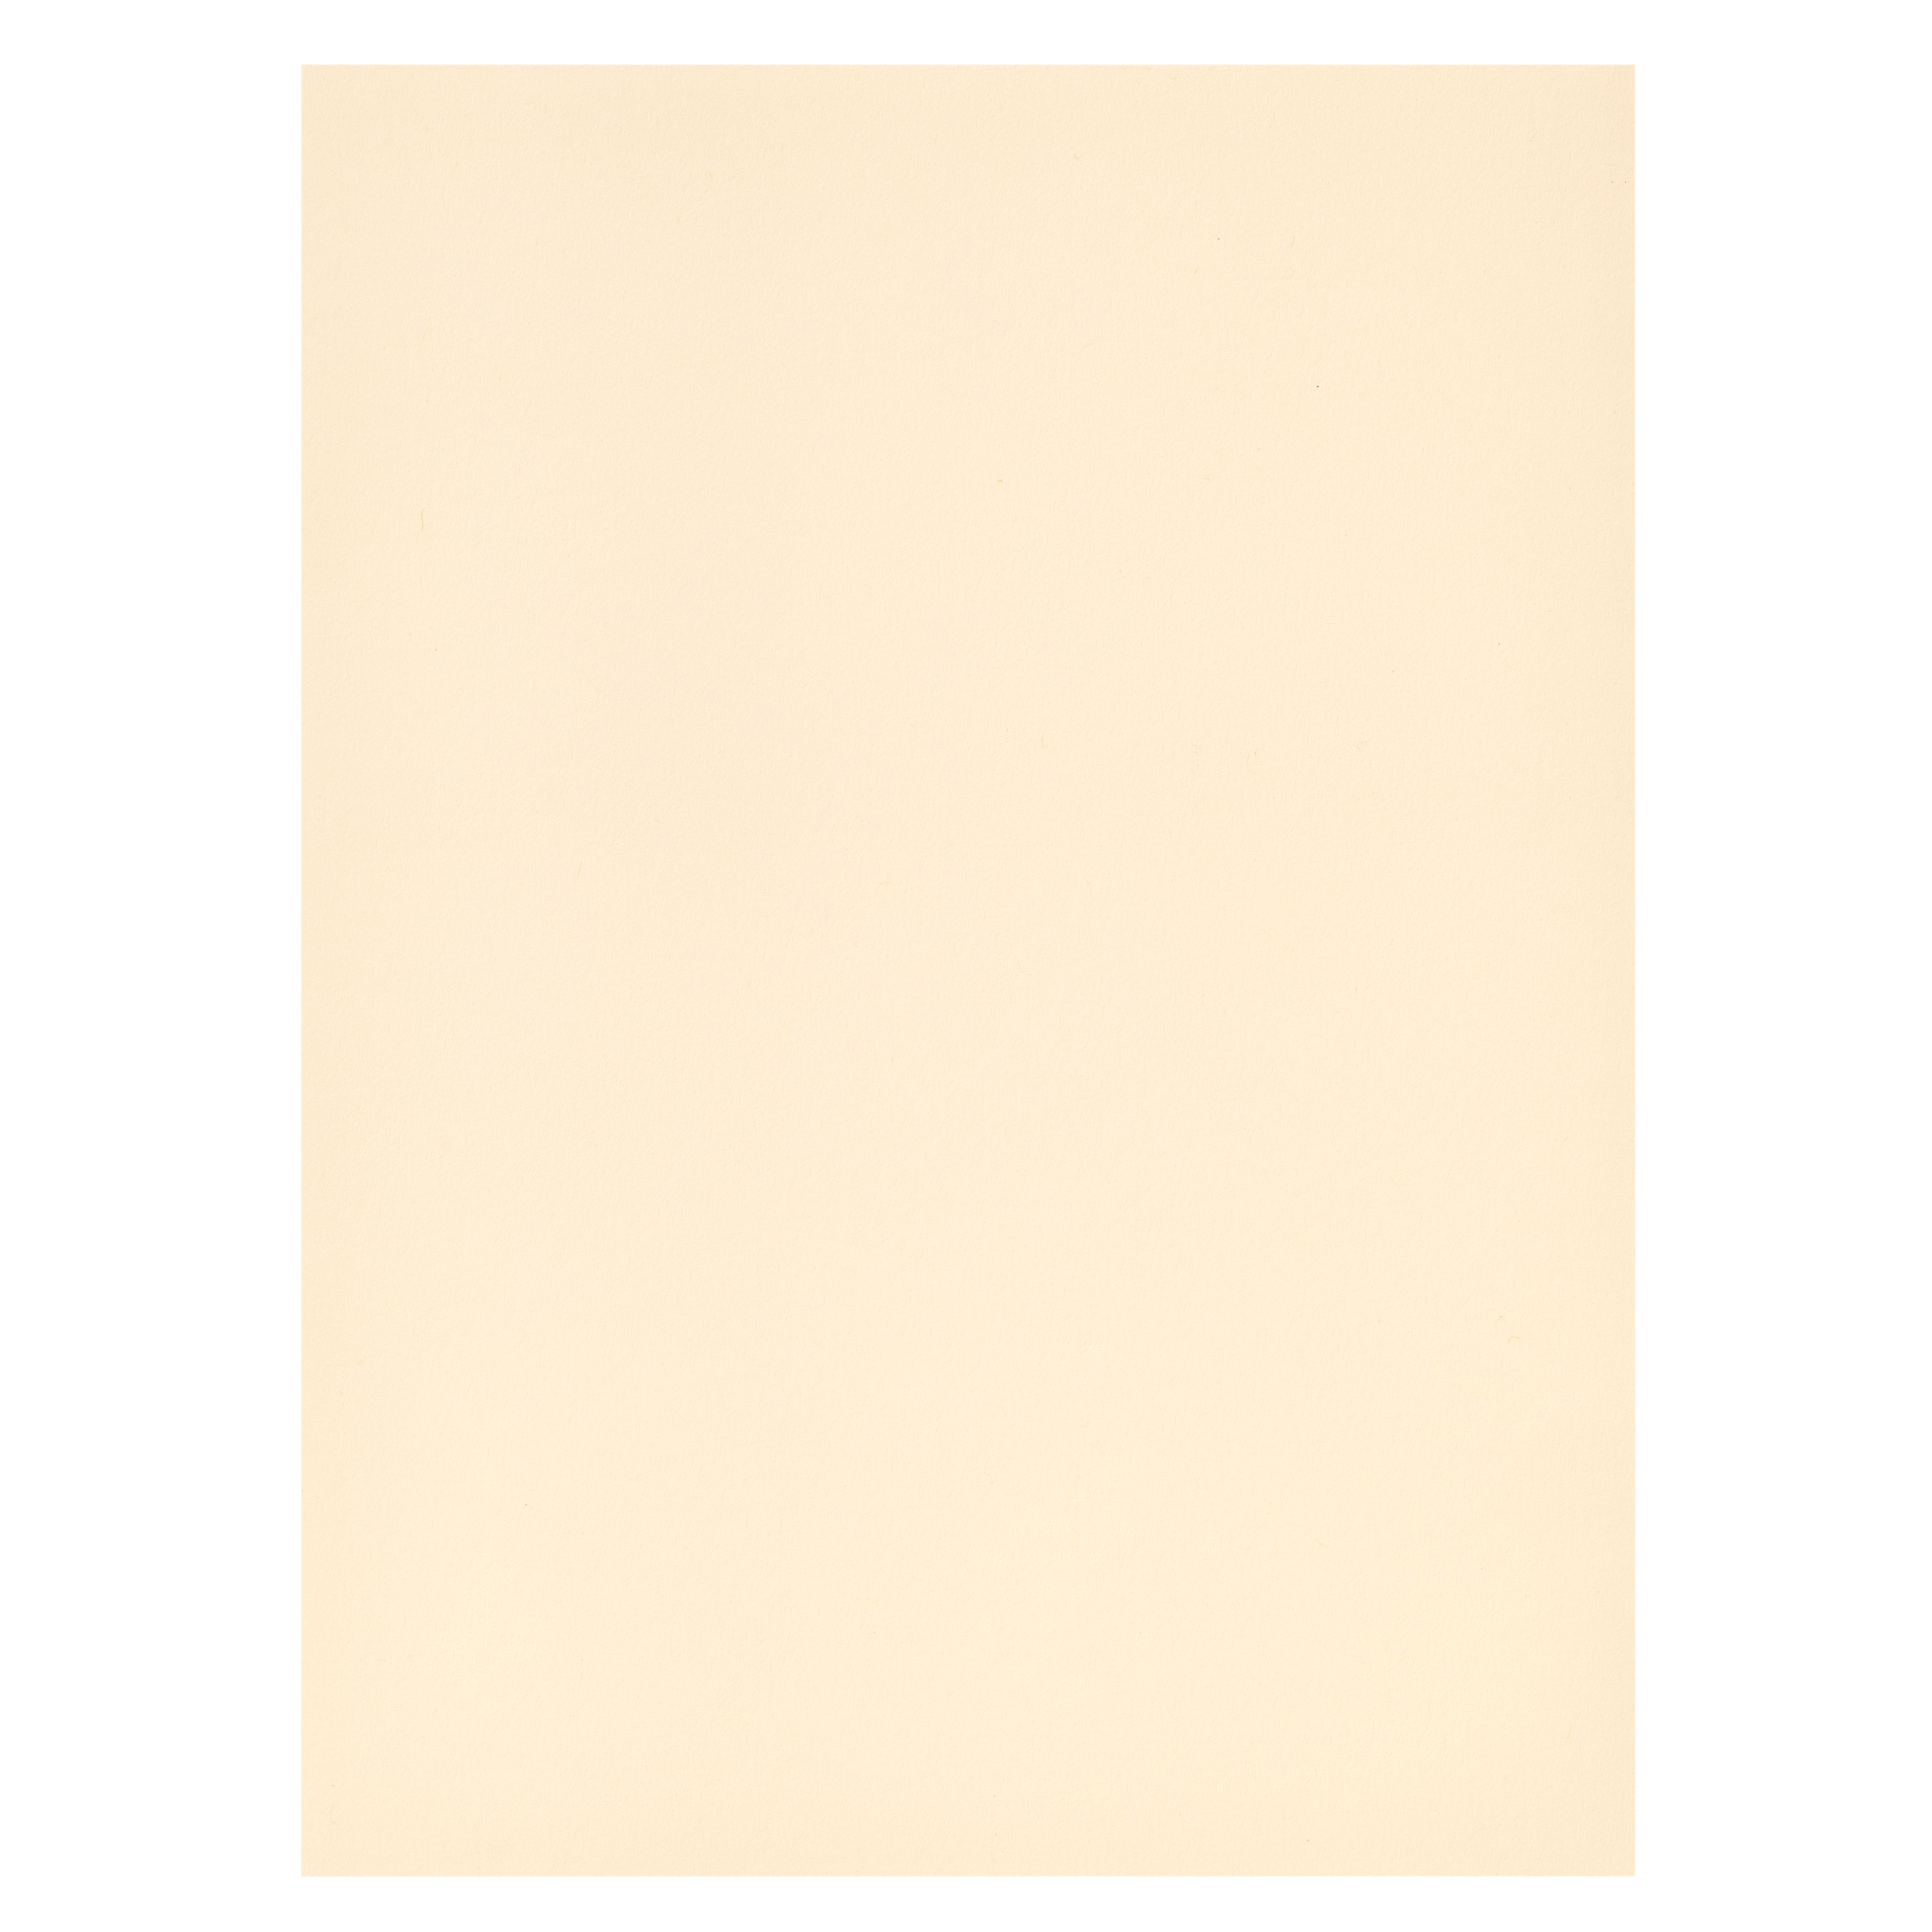 White Dove 5.5 x 7.5 Cardstock Paper by Recollections™, 100 Sheets